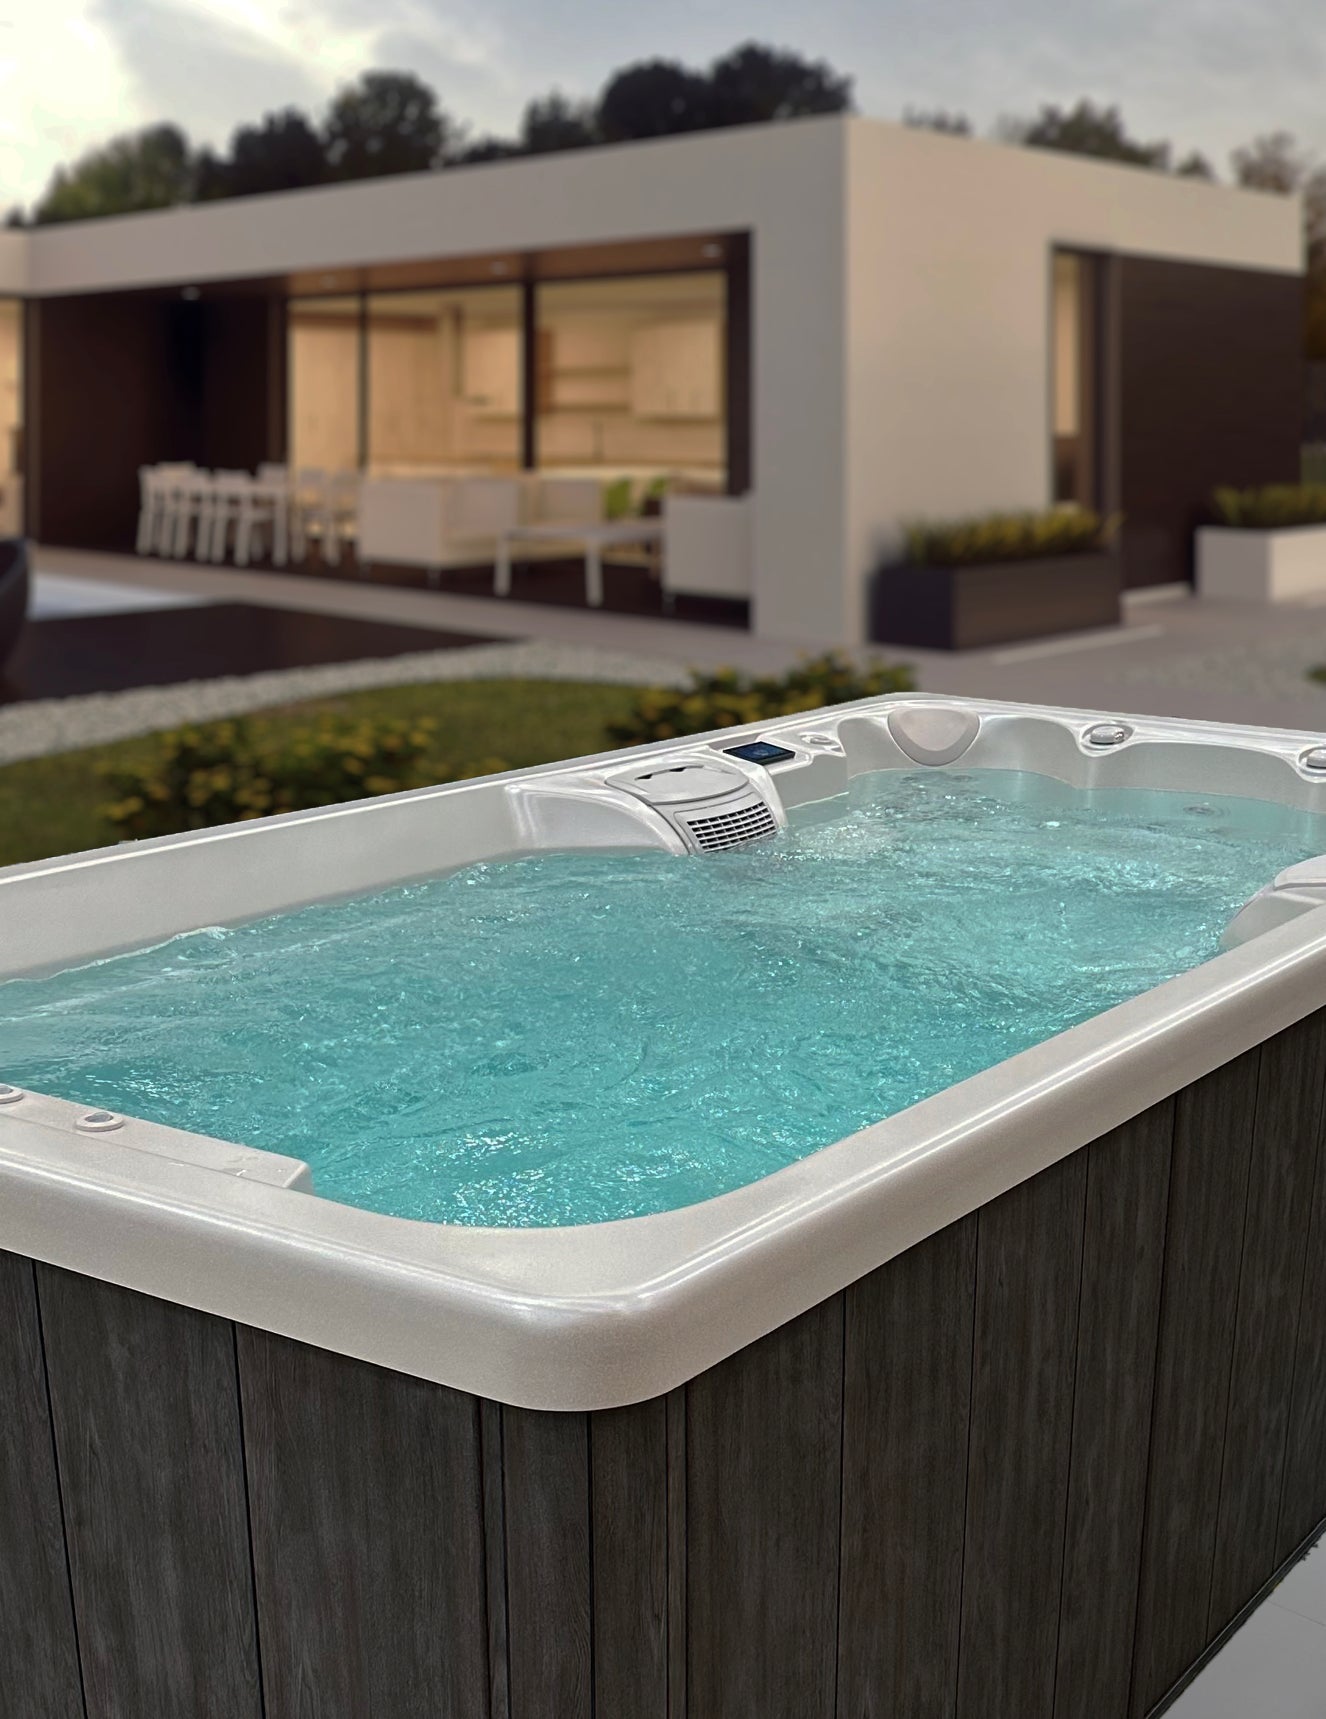 Call Conquest Pools Albury Wodonga for all swimming pool, spa and swim spa needs! Your local swimming pool company